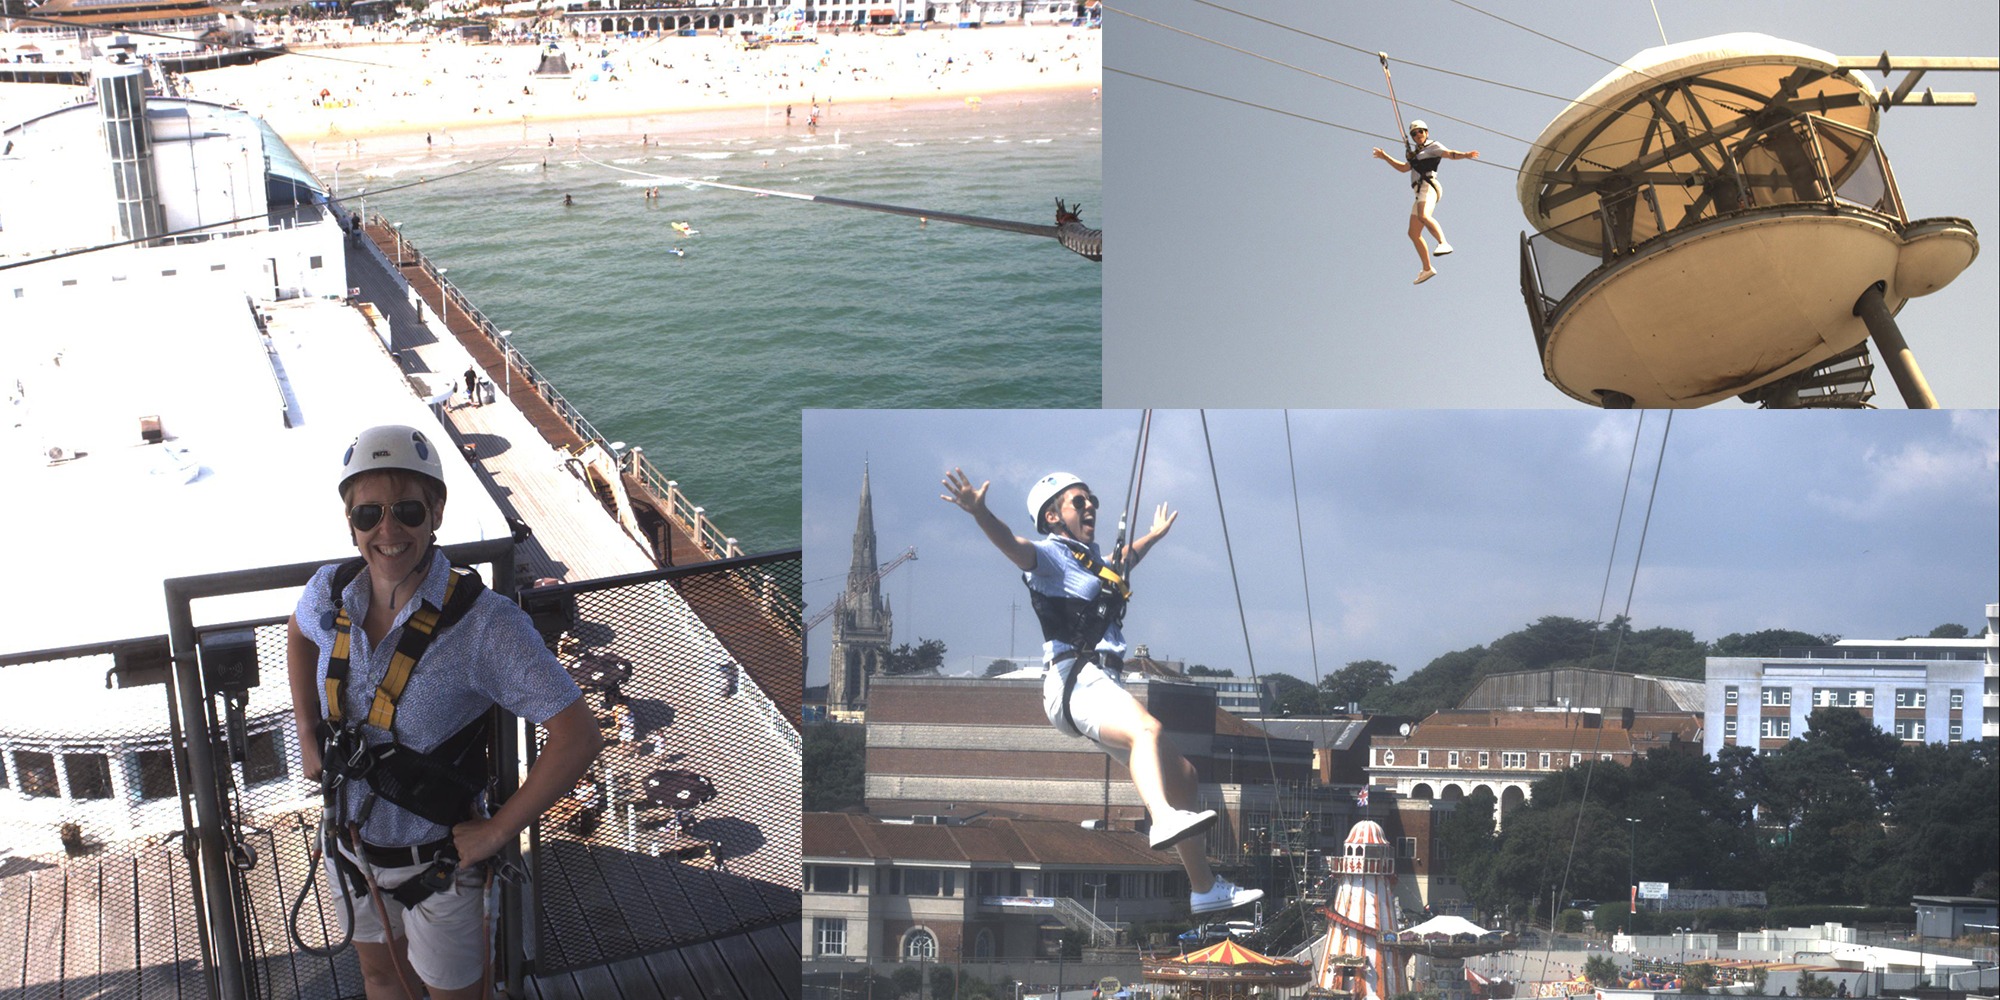 New photo system installed at the top of the PierZip tower on Bournemouth Pier to allow unique ‘selfies’ of zip wire flights